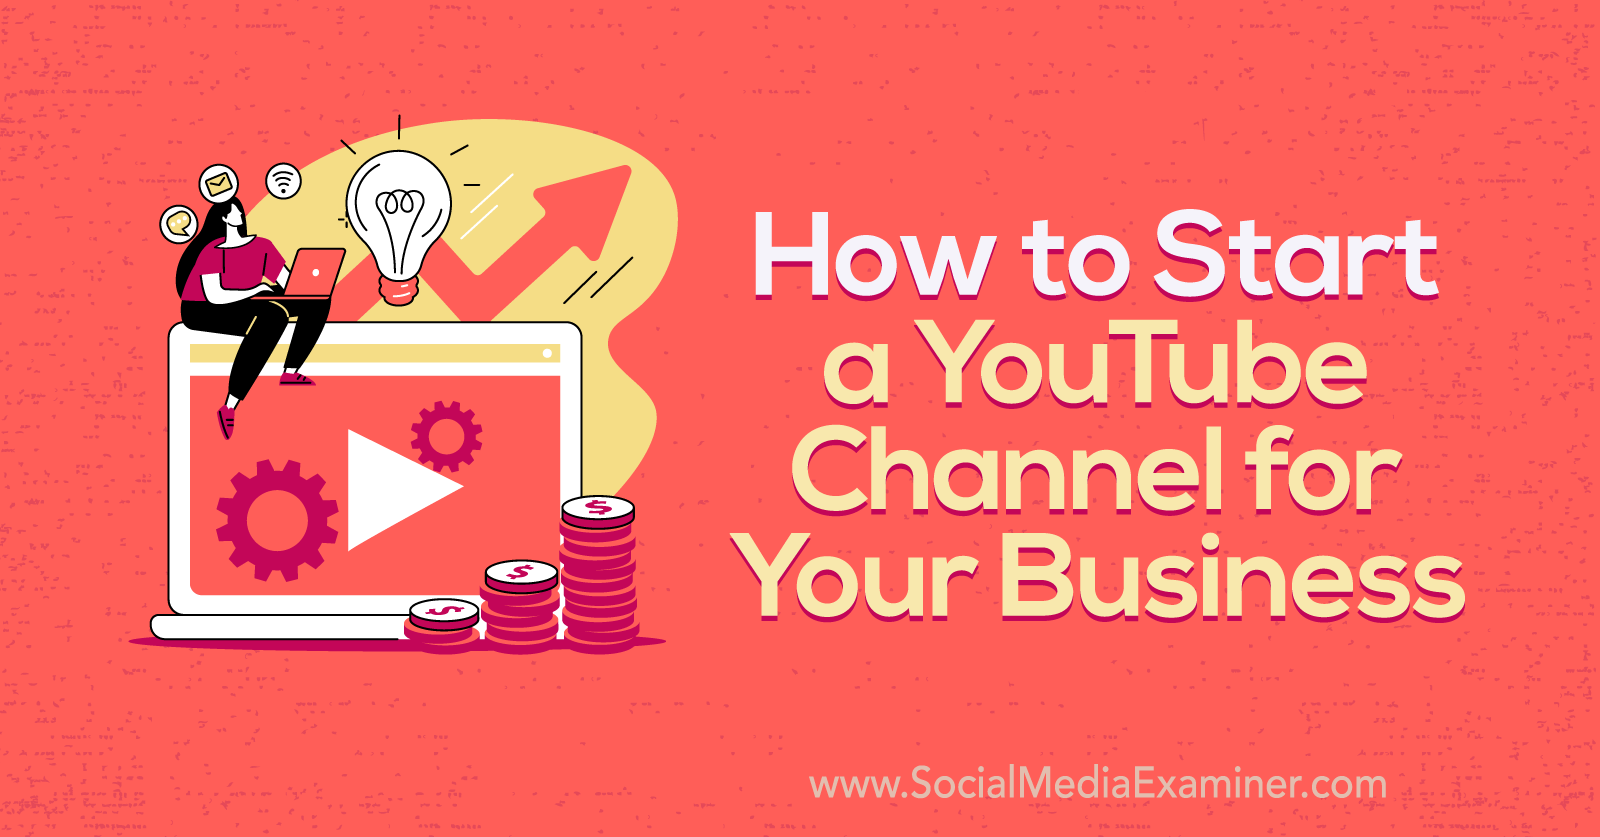 How to Start a YouTube Channel for Your Business-Social Media Examiner